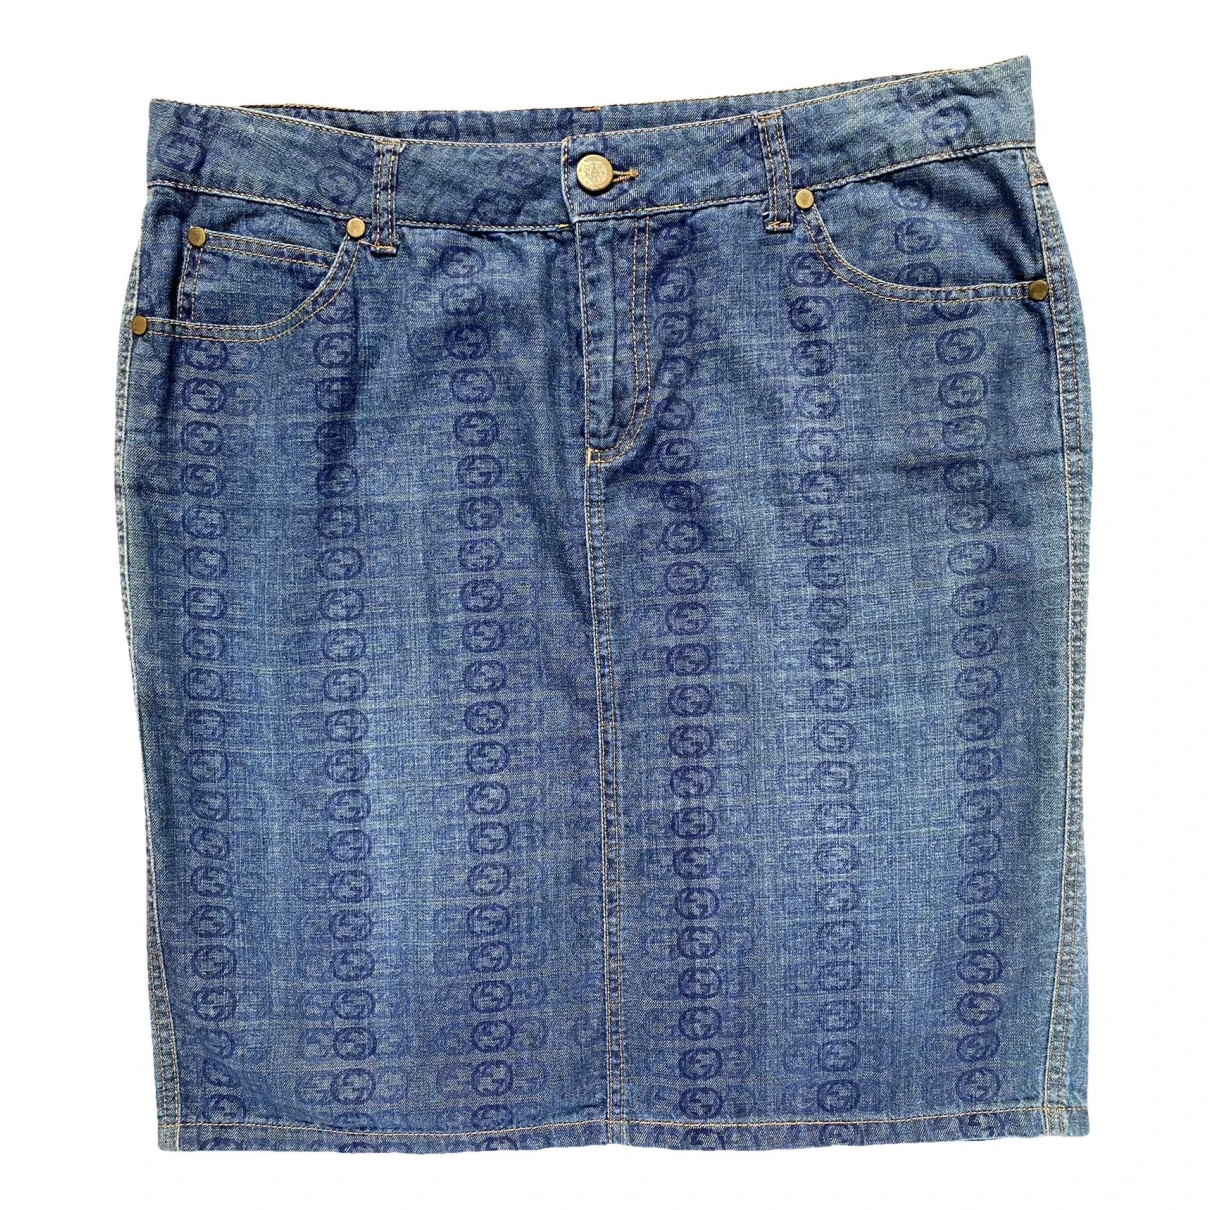 Pre-owned Gucci Mini Skirt In Blue